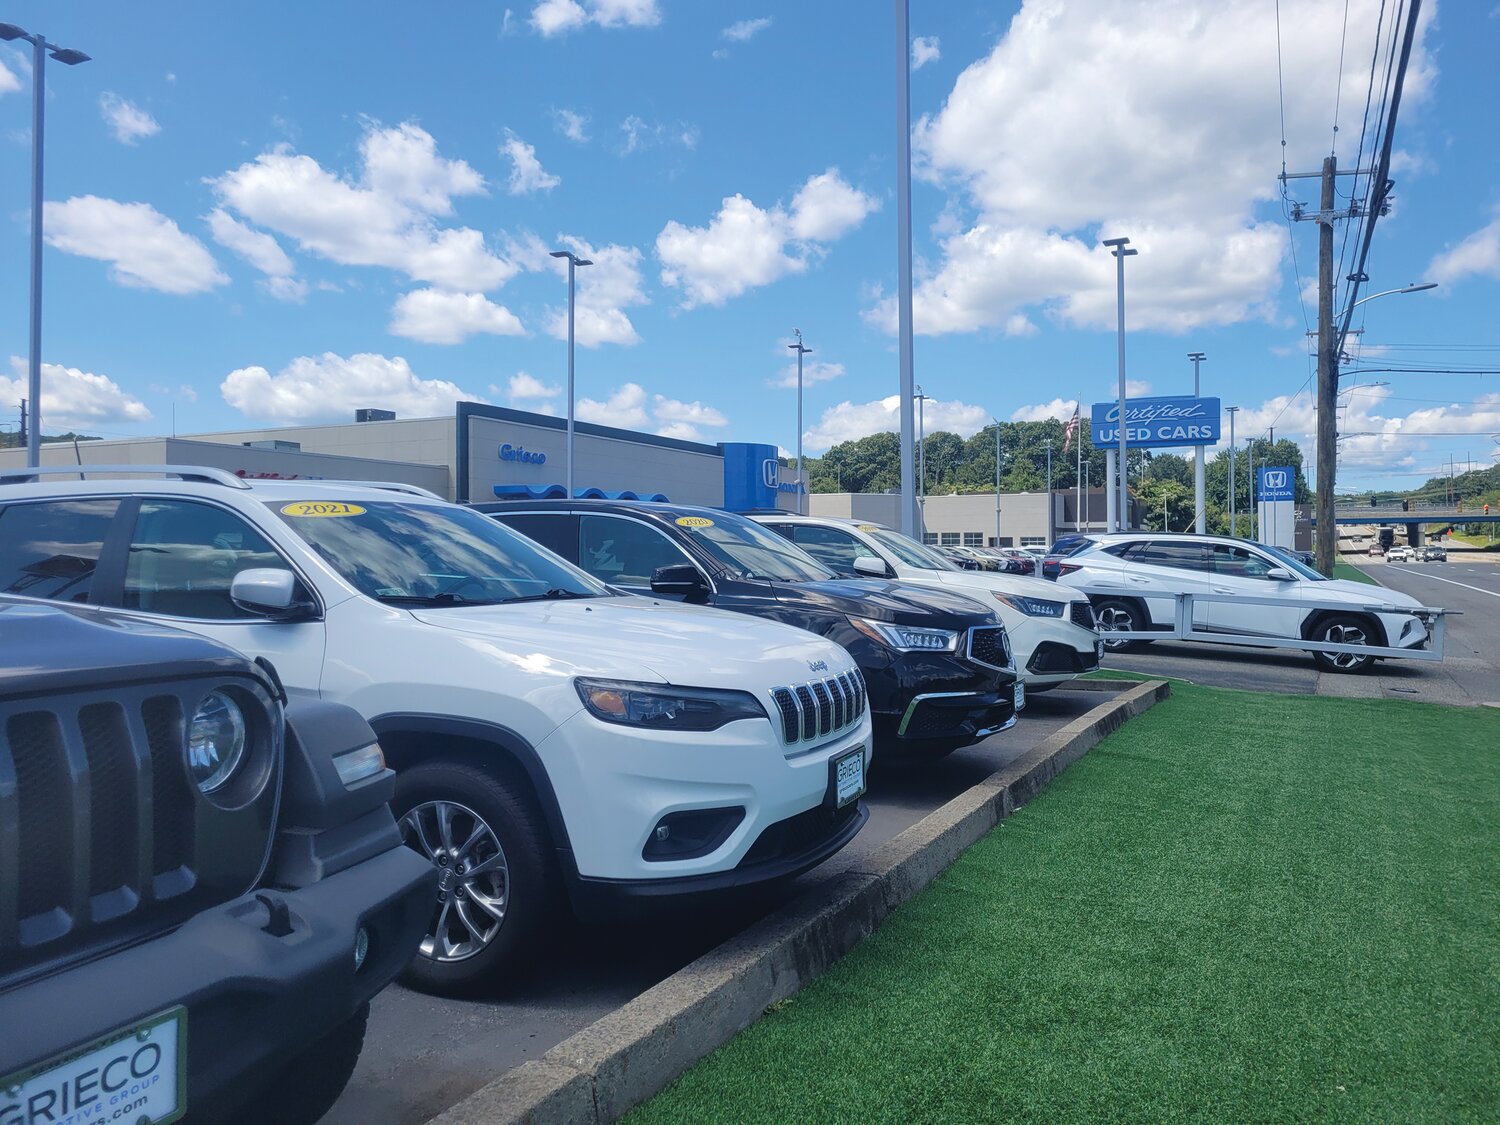 AG ACTION: The Rhode Island Attorney General has alleged Hartford Avenue dealerships “Grieco Honda, Grieco Toyota, and Grieco Hyundai engaged in sales and pricing tactics that violated the Deceptive Trade Practices Act (DTPA).”